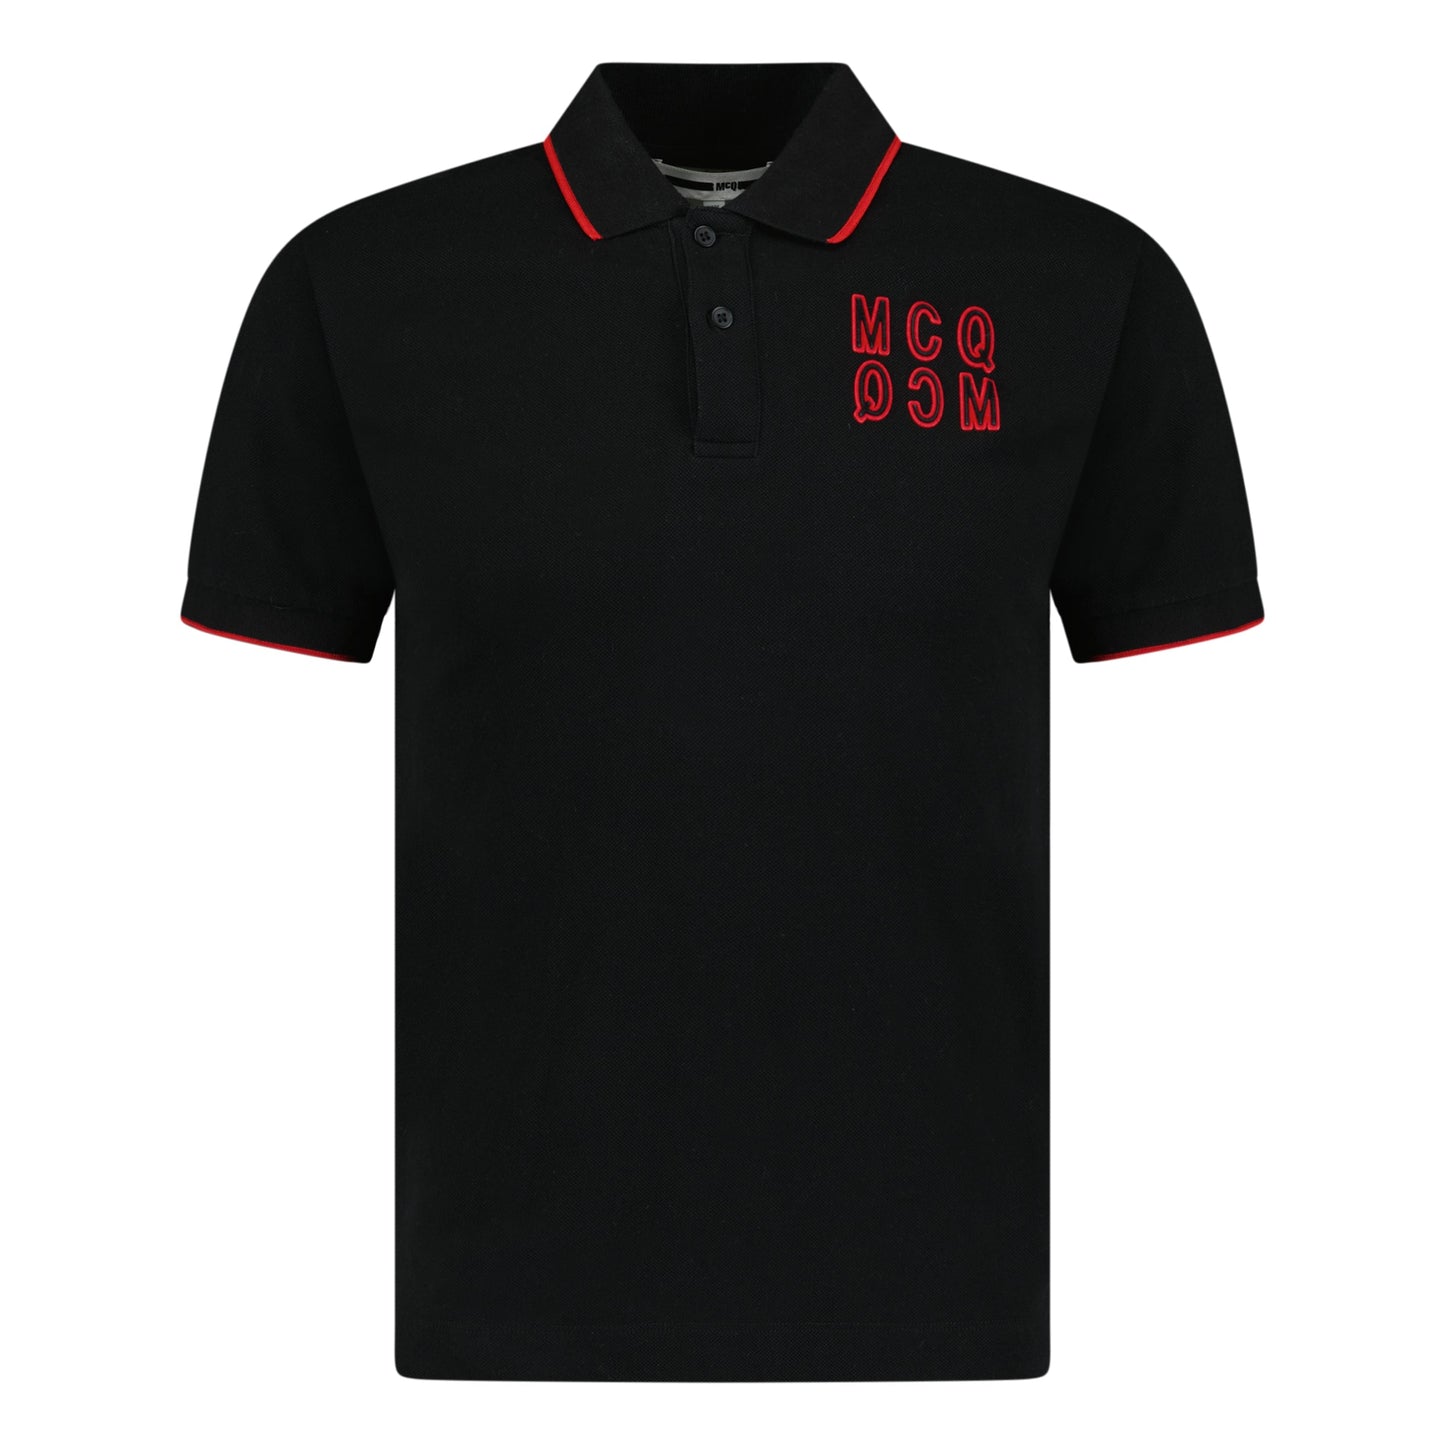 ALEXANDER MCQUEEN POLO BLACK - SMALL - affluentarchivesUsed HIGH END DESIGNER CLOTHING